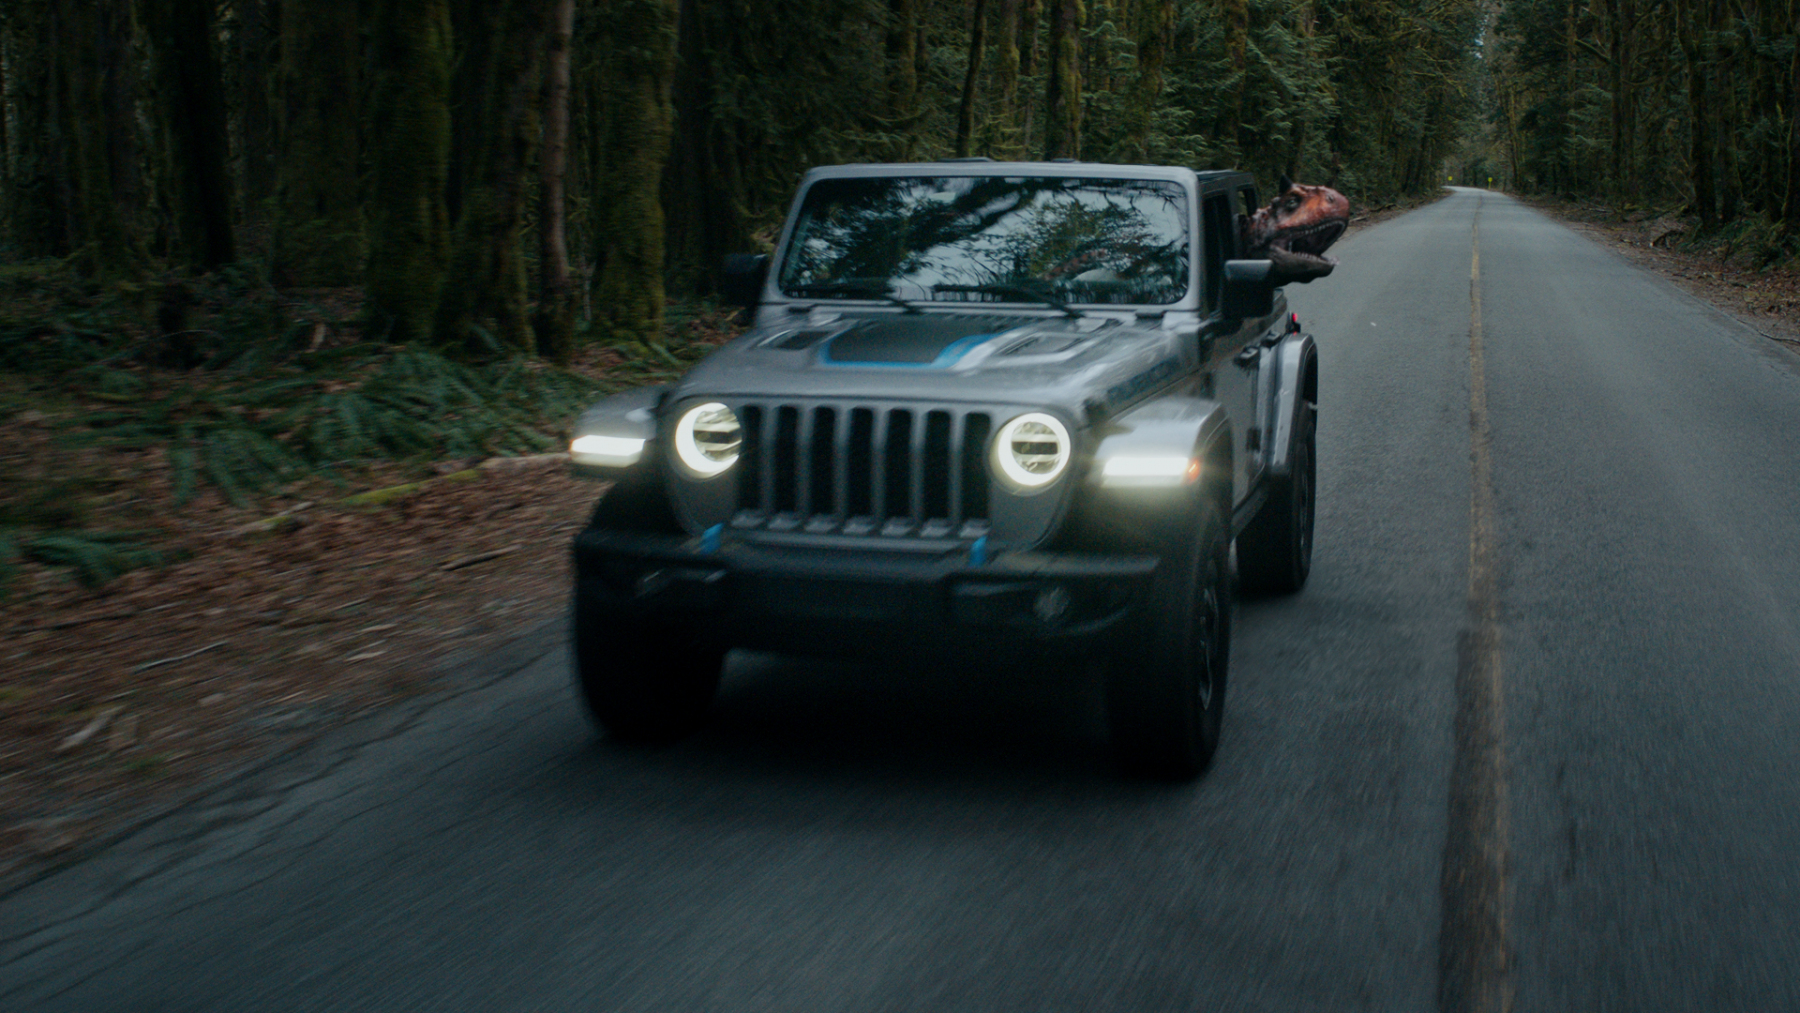 Jeep® brand partners with Universal Pictures to launch global 'Jurassic World Dominion' marketing campaign